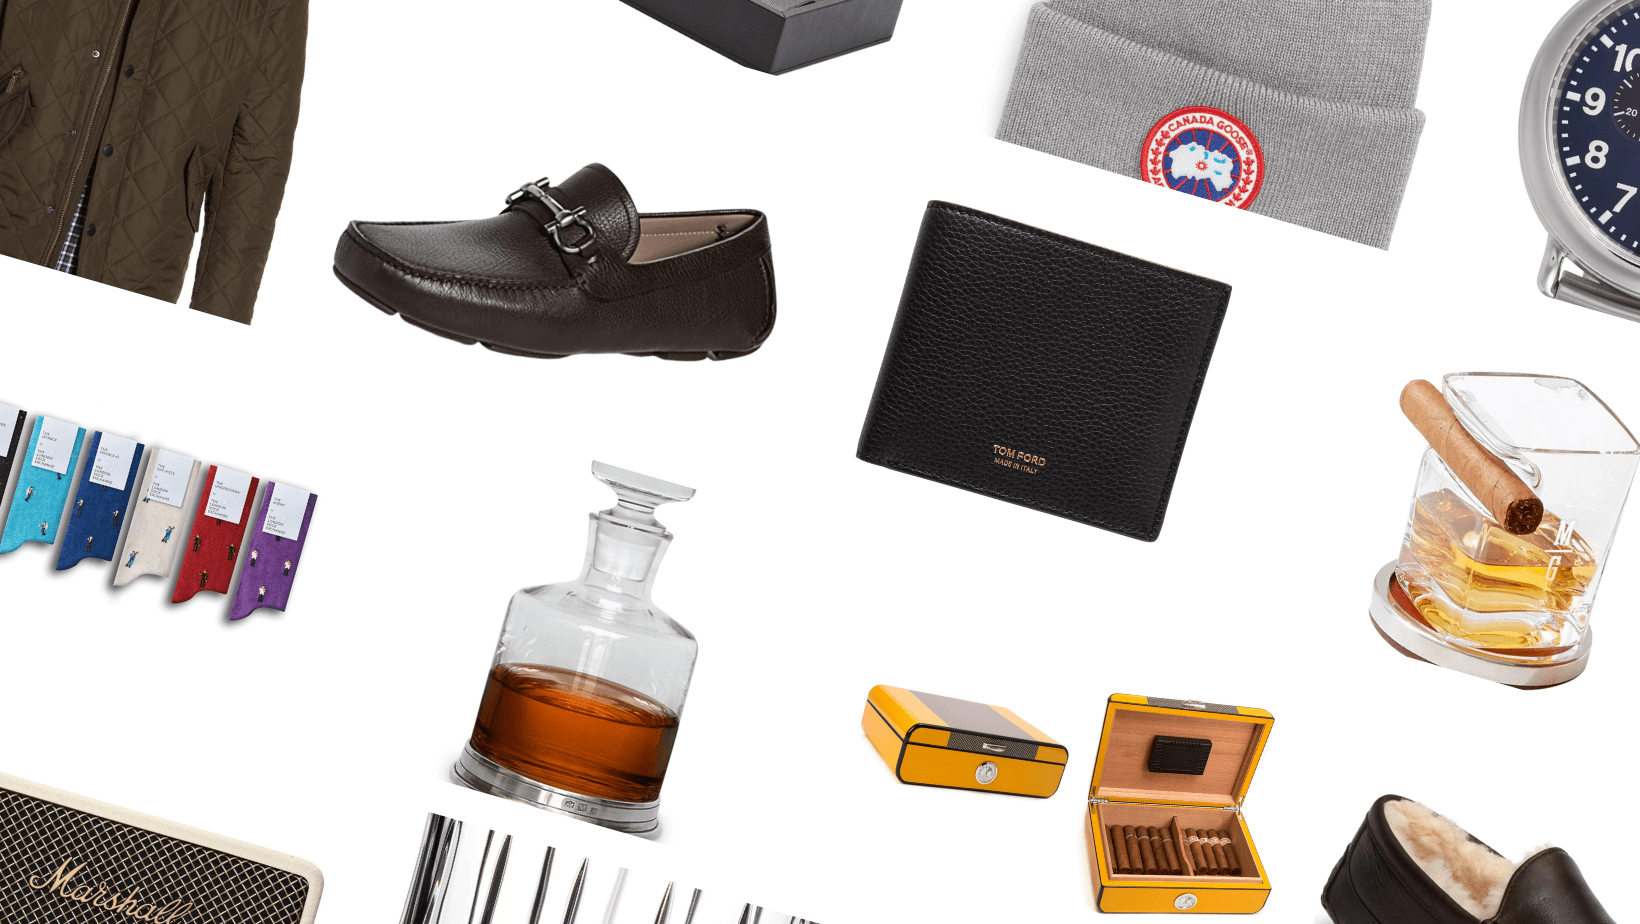 GIFT GUIDE FOR HIM